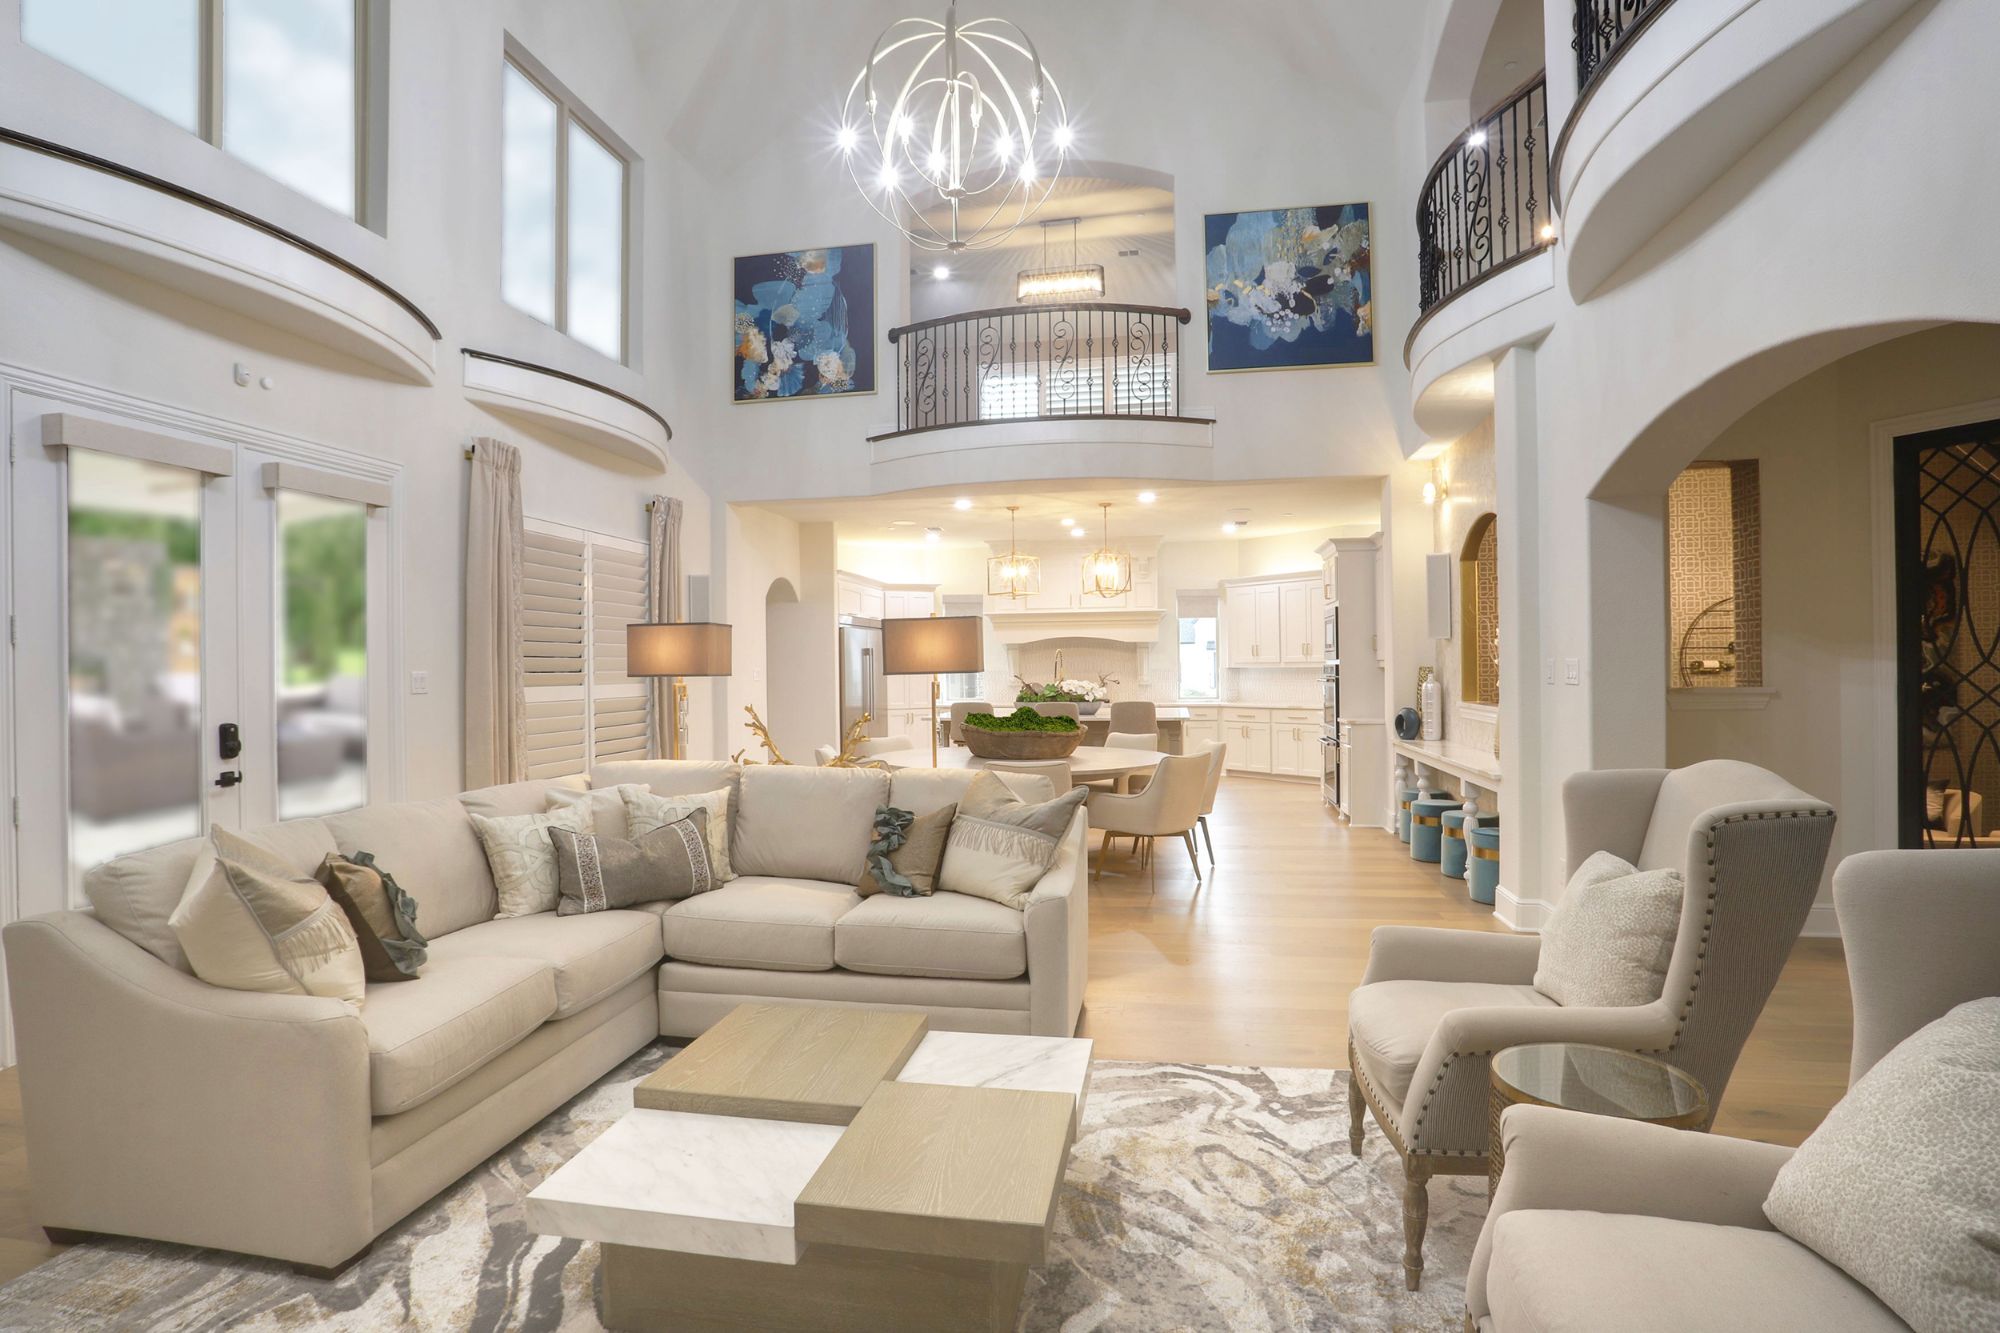 Large living room with tall ceilings and custom furniture